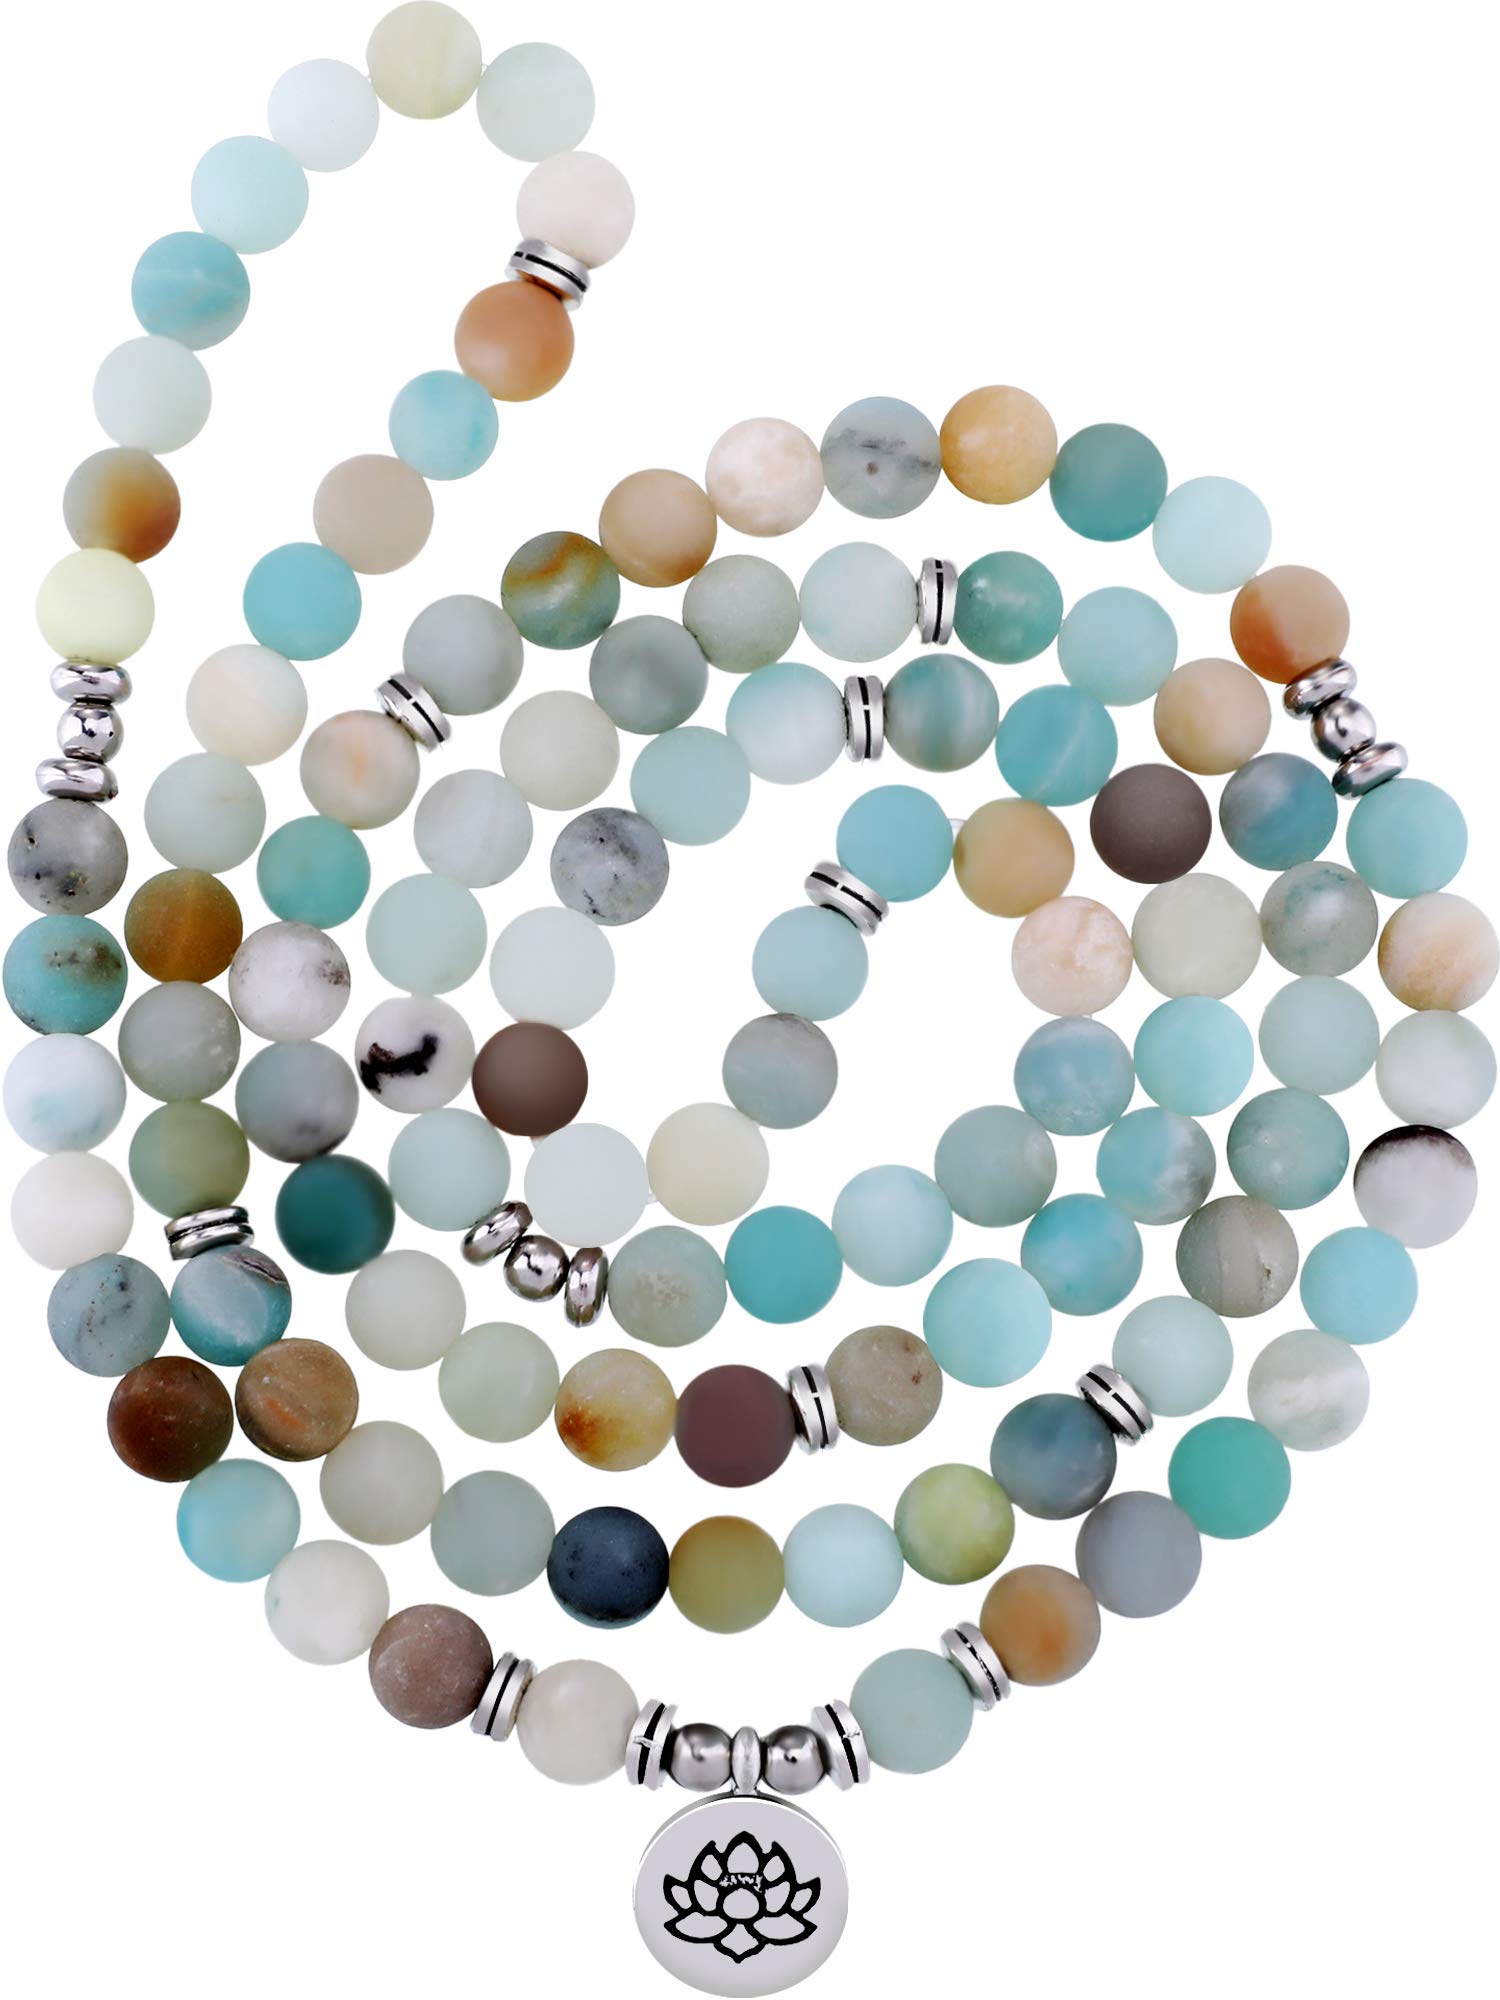 8 mm Mala Amazonite Necklace Bracelet Mala Necklace Beads Natural Gemstone Necklace with 108 Round Beads for Men Women Jewelry Decoration Supplies